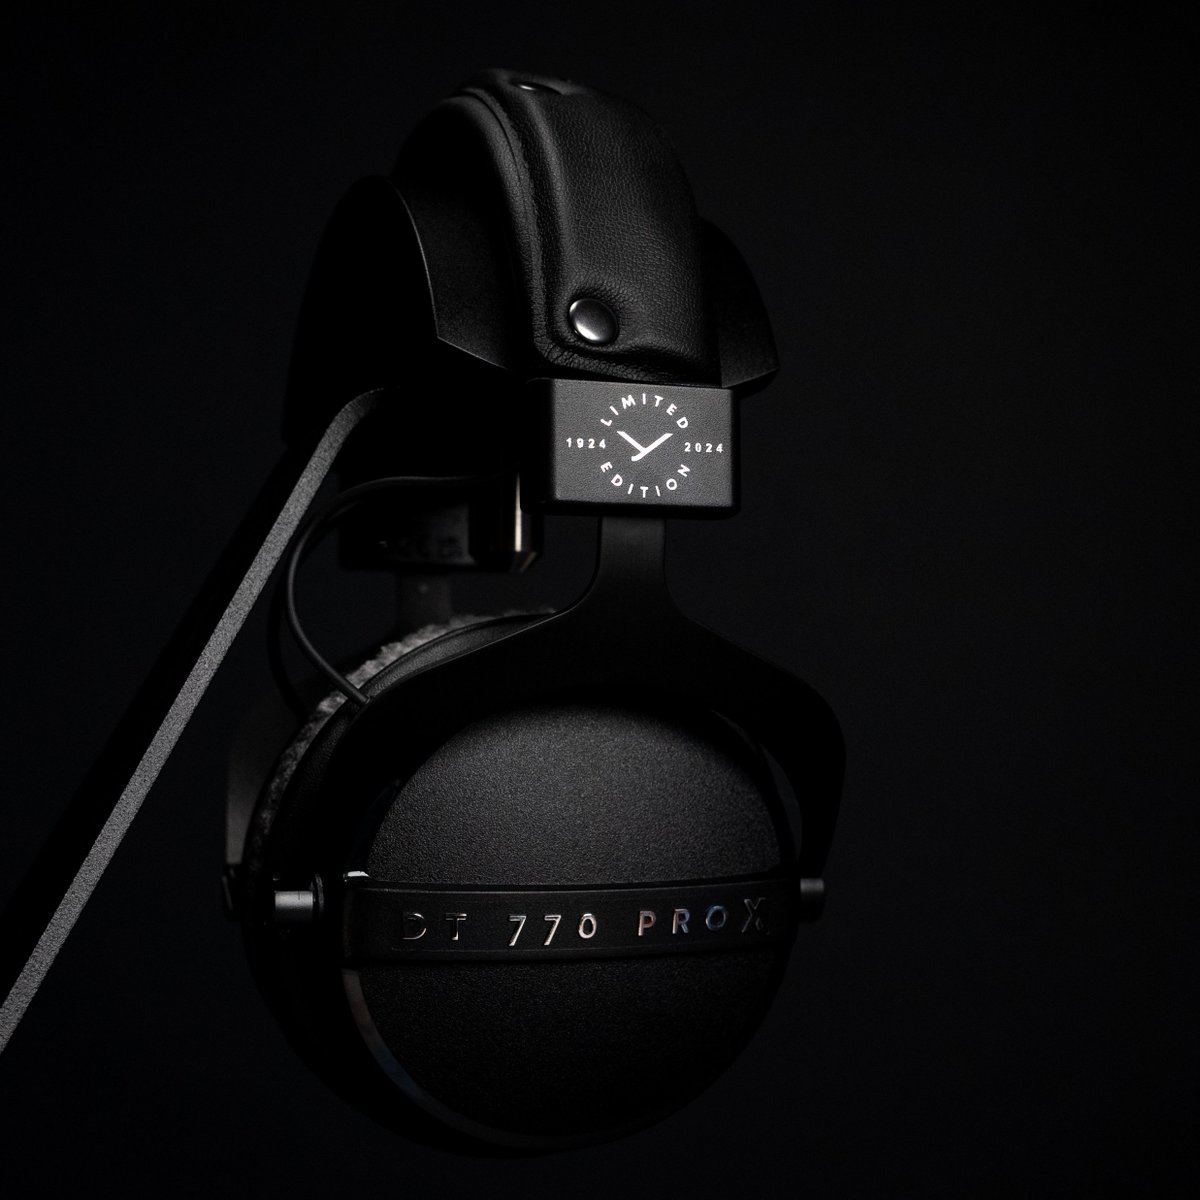 The DT 770 Pro X Limited Edition is officially available as of today.  It celebrates 100 years of beyerdynamic's existence!  I also happened to have released a video about it.  How fortuitous!  youtu.be/M6LBkVJJslw